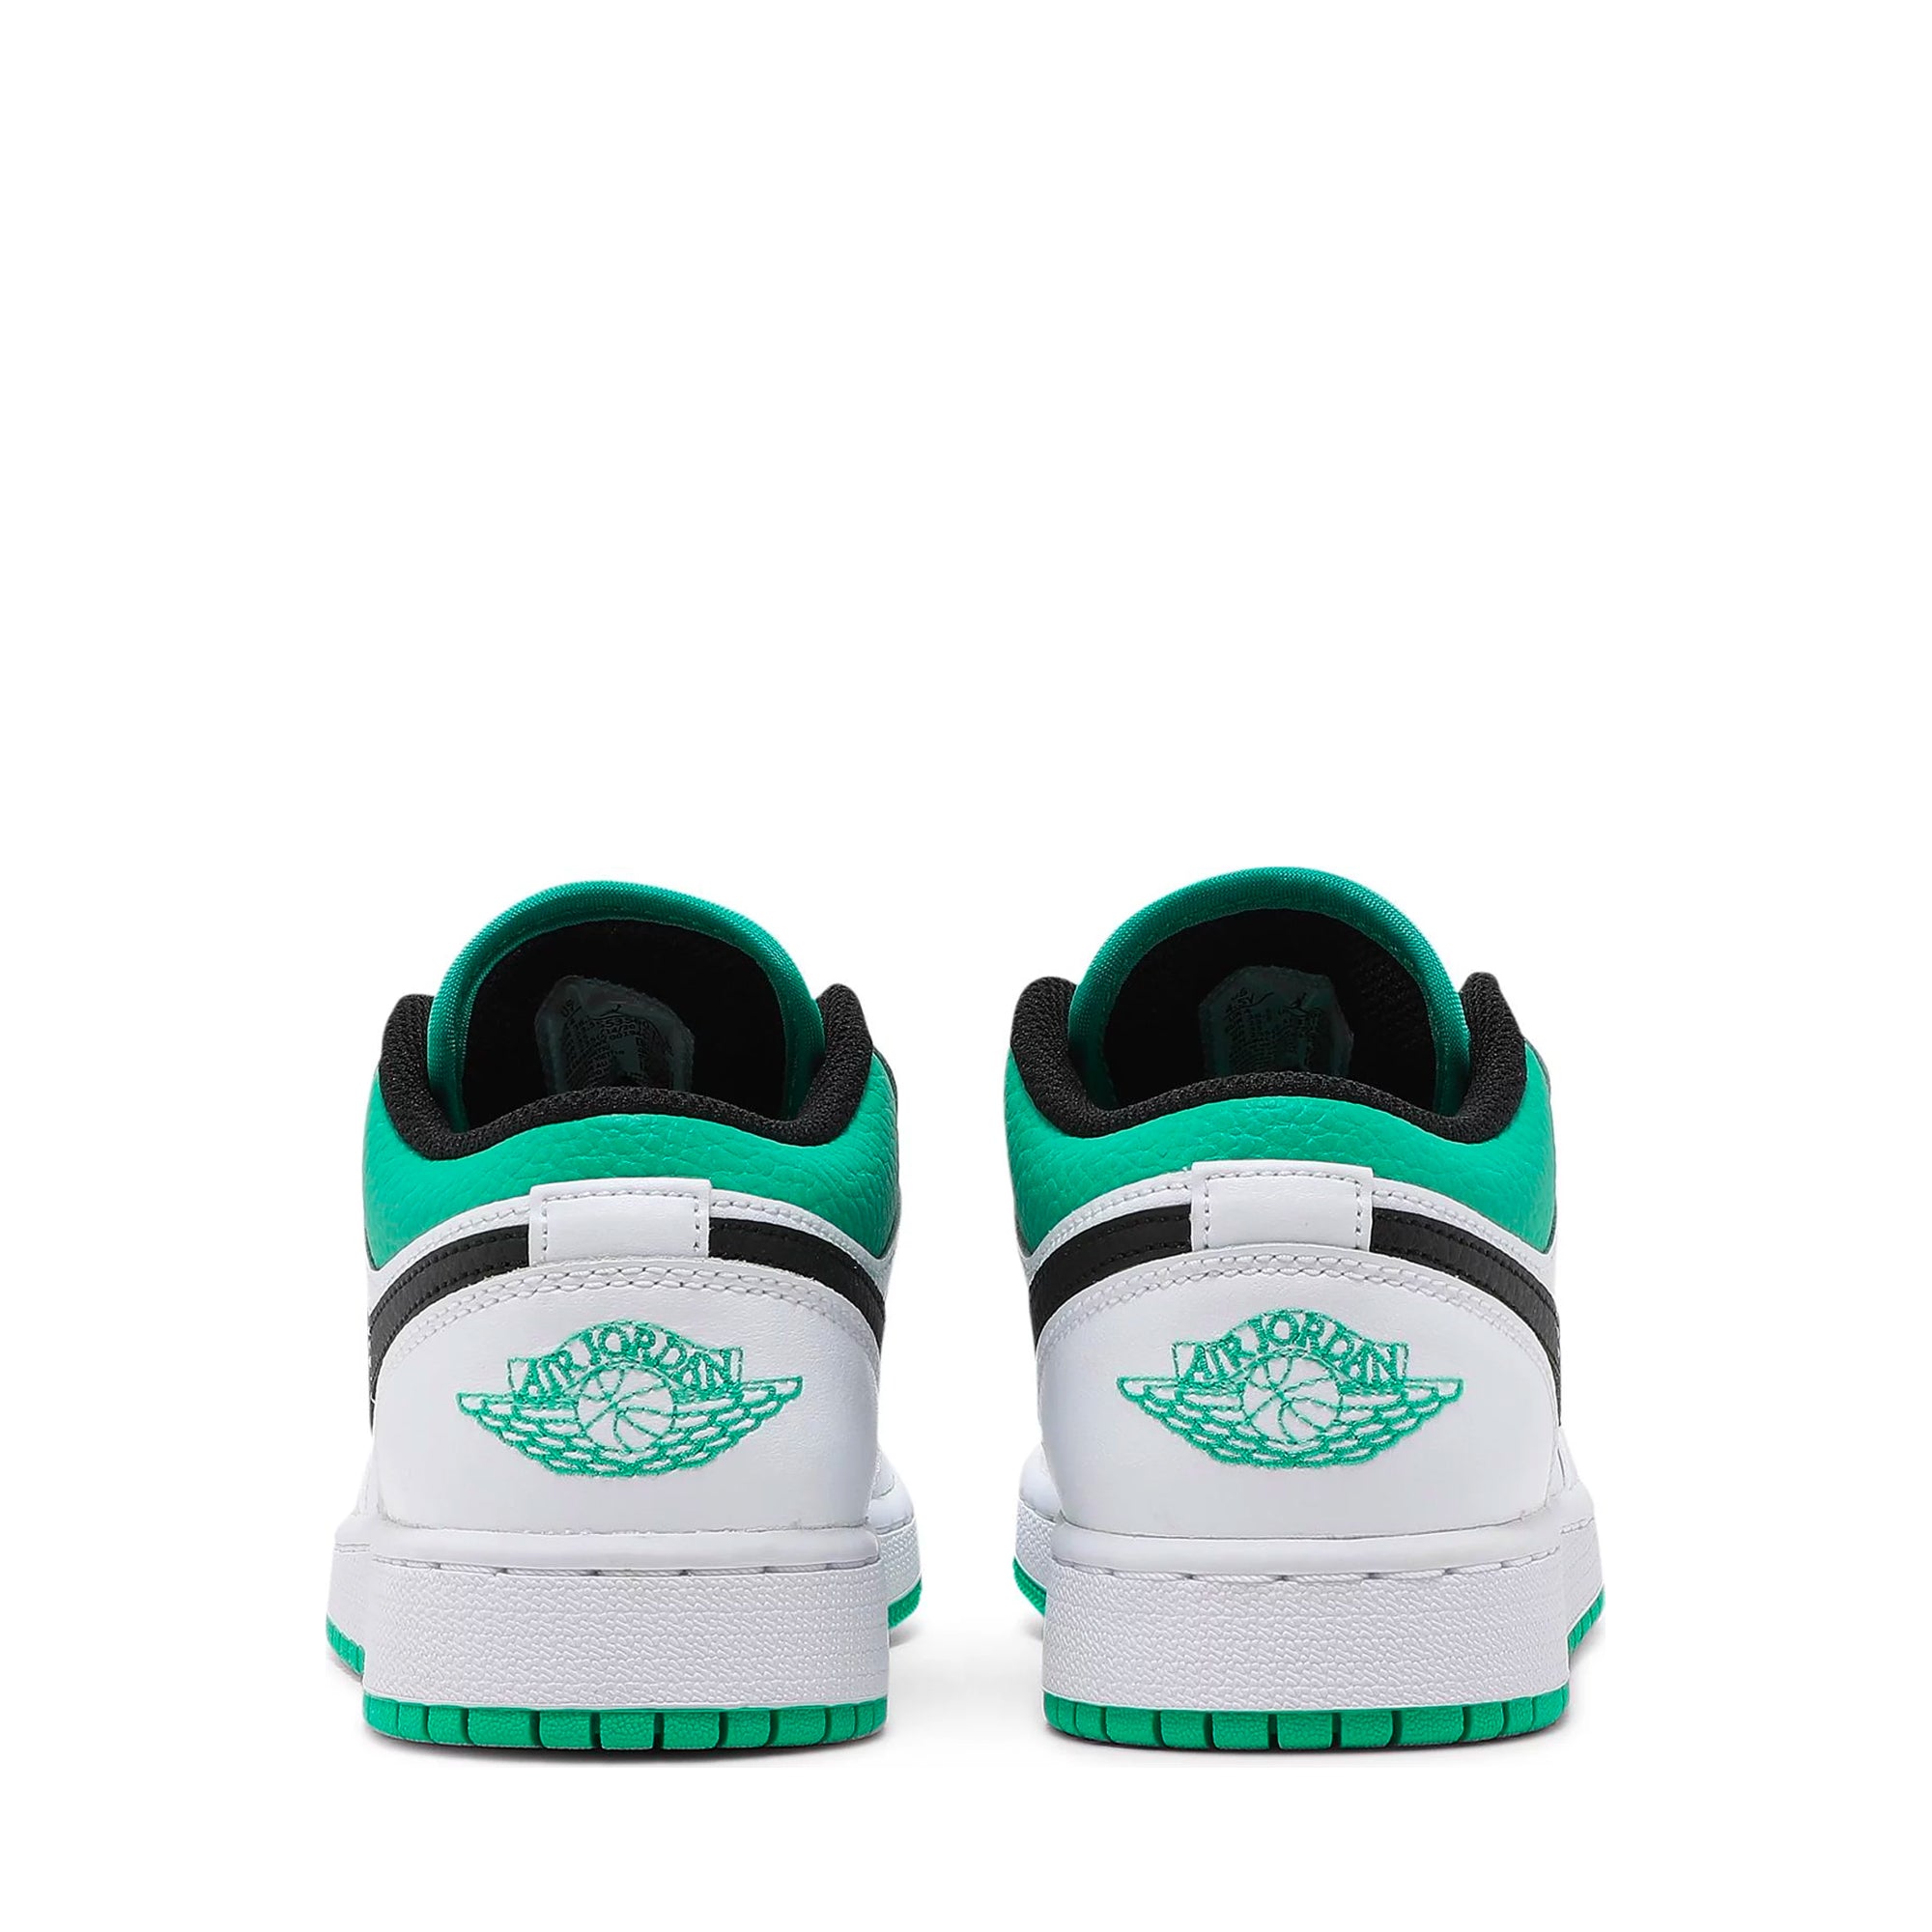 Jordan 1 Low White Lucky Green Tumbled Leather (GS)-PLUS